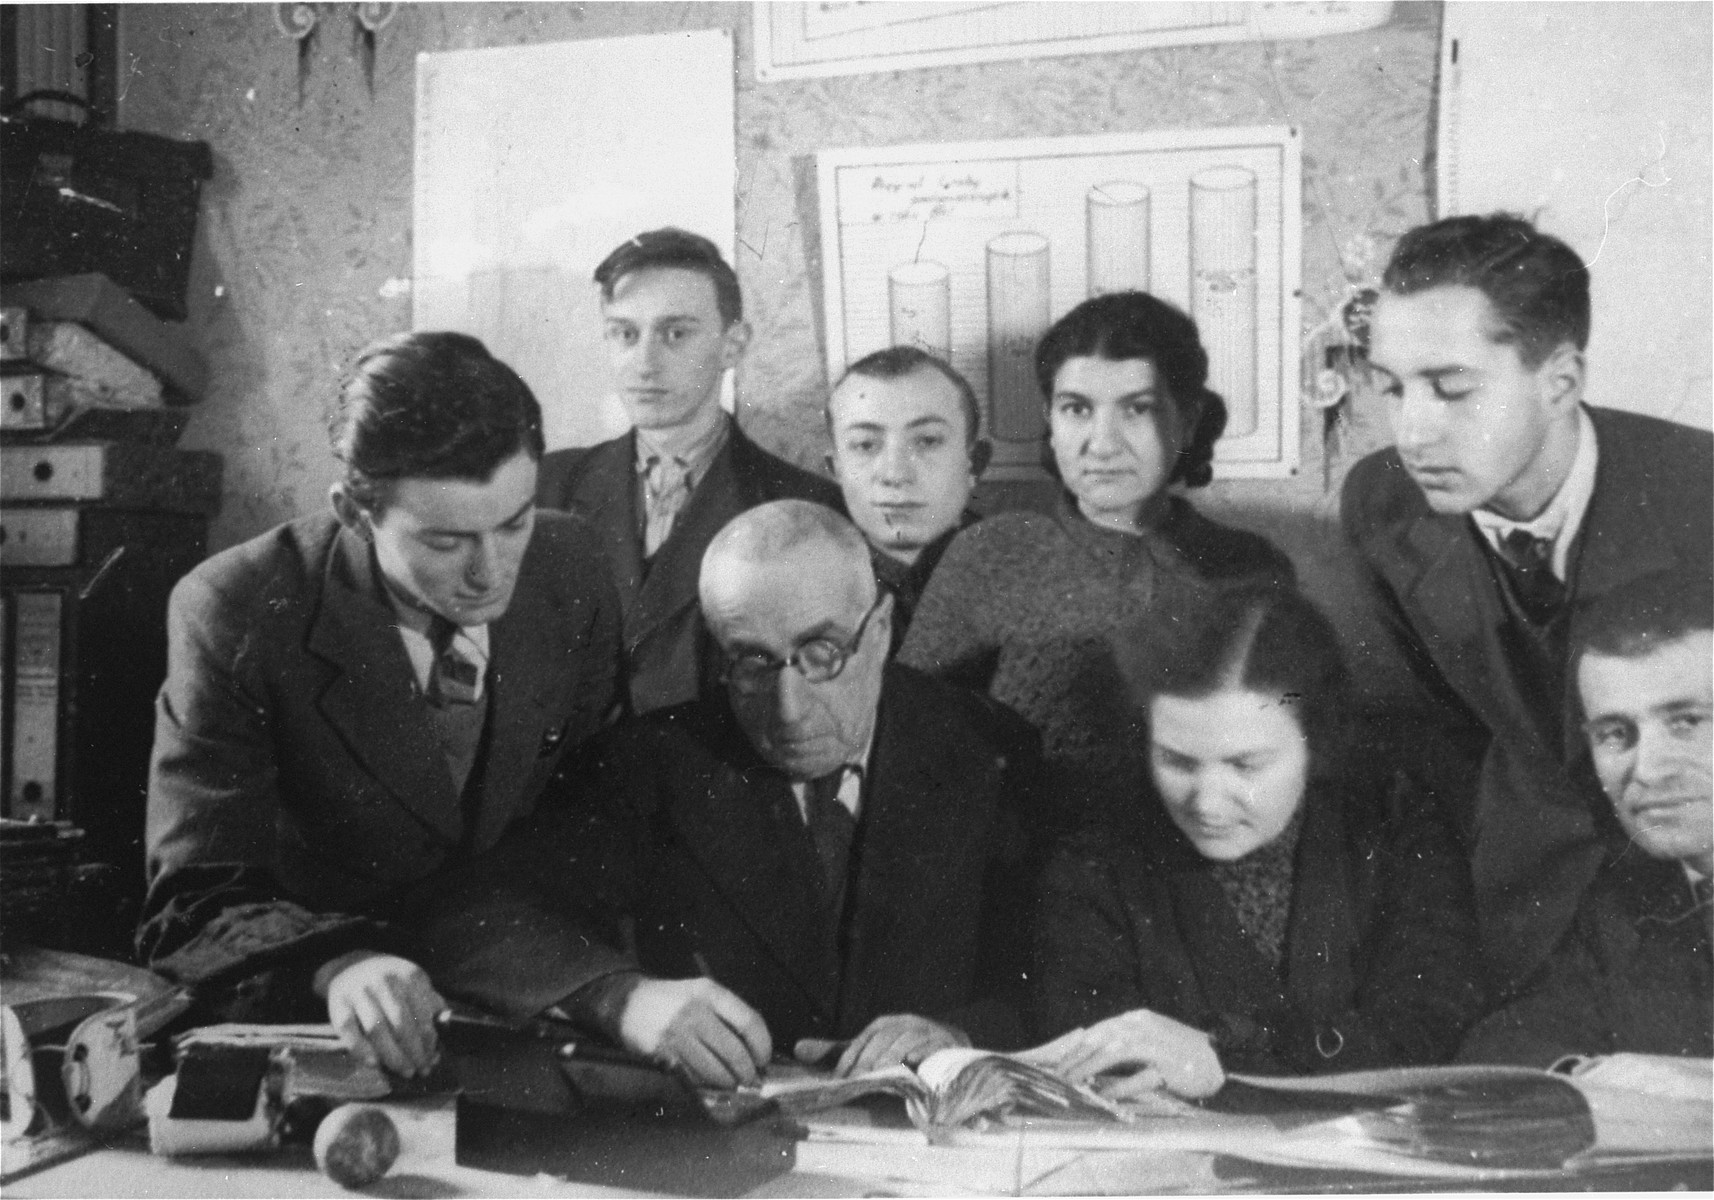 Group portrait of members of the administrative staff of the Kielce ghetto Judenrat (Jewish Council) in their office.

This photo was one the images included in an official album prepared by the Judenrat of the Kielce ghetto in 1942.